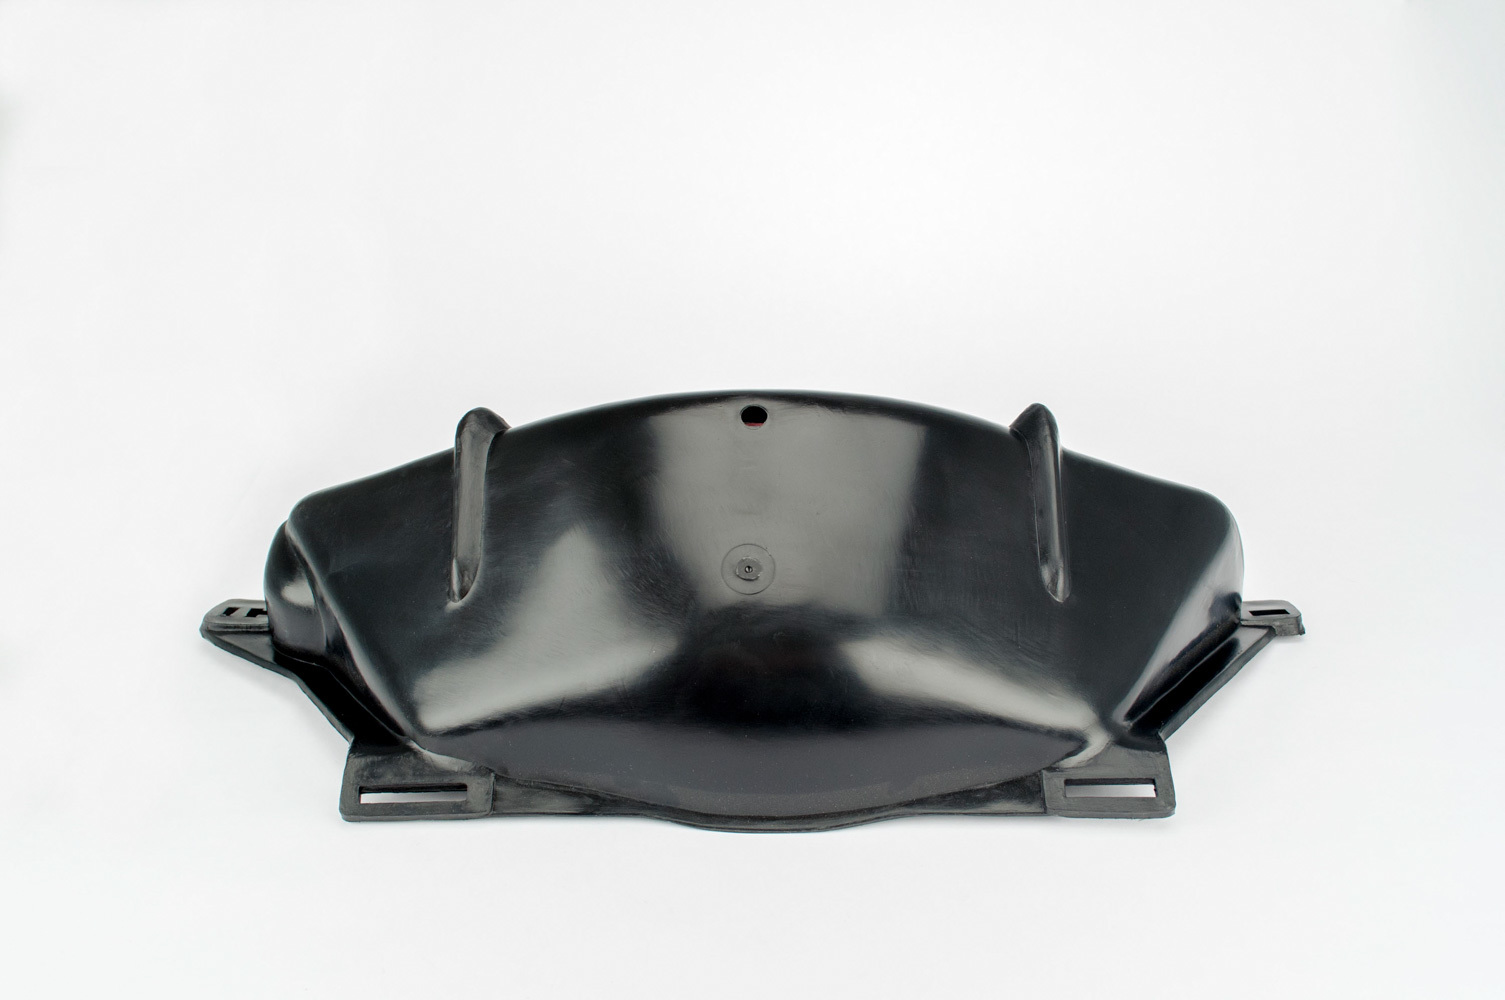 TCI 743866 Transmission Dust Cover, Torque Converter Cover, Plastic, Black, TH200 / TH250 / TH350 / TH375 / TH400, Each